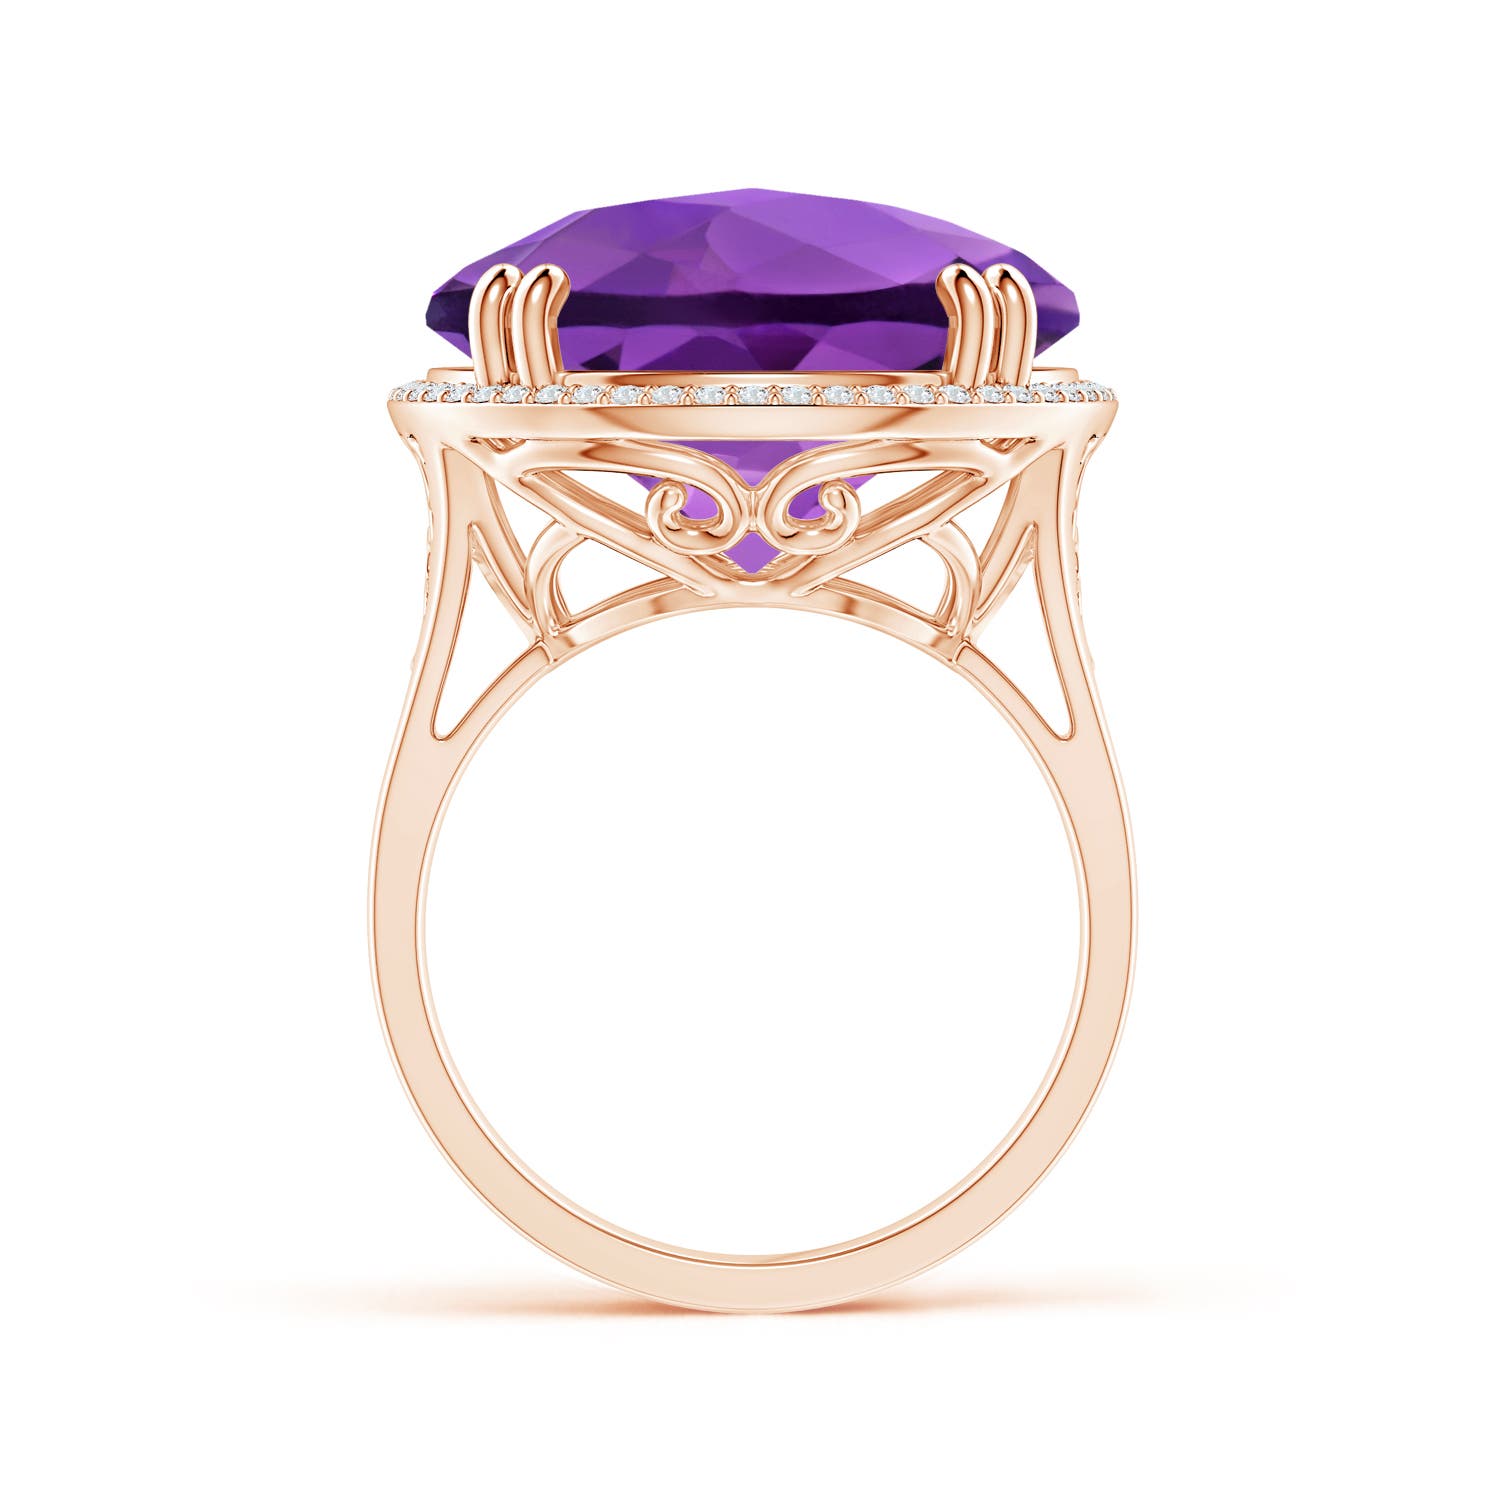 AA - Amethyst / 18.23 CT / 14 KT Rose Gold